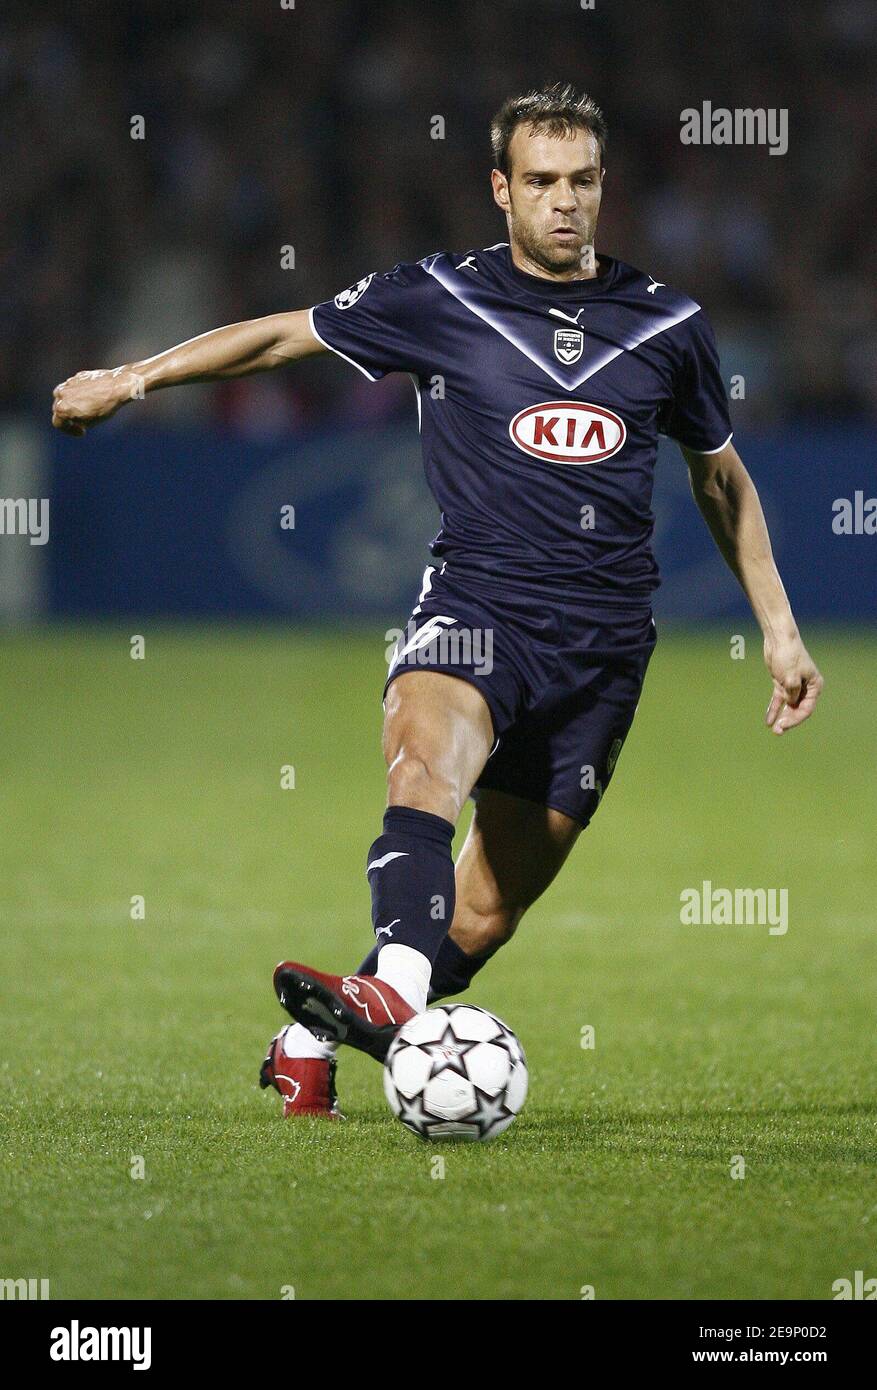 Bordeaux' Franck Jurietti in action during the UEFA Champions League, Group C, Girondins de Bordeaux vs Liverpool FC at the Stade Chaban-Delmas in Bordeaux, France on October 18, 2006. Liverpool won 1-0. Photo by Christian Liewig/ABACAPRESS.COM Stock Photo